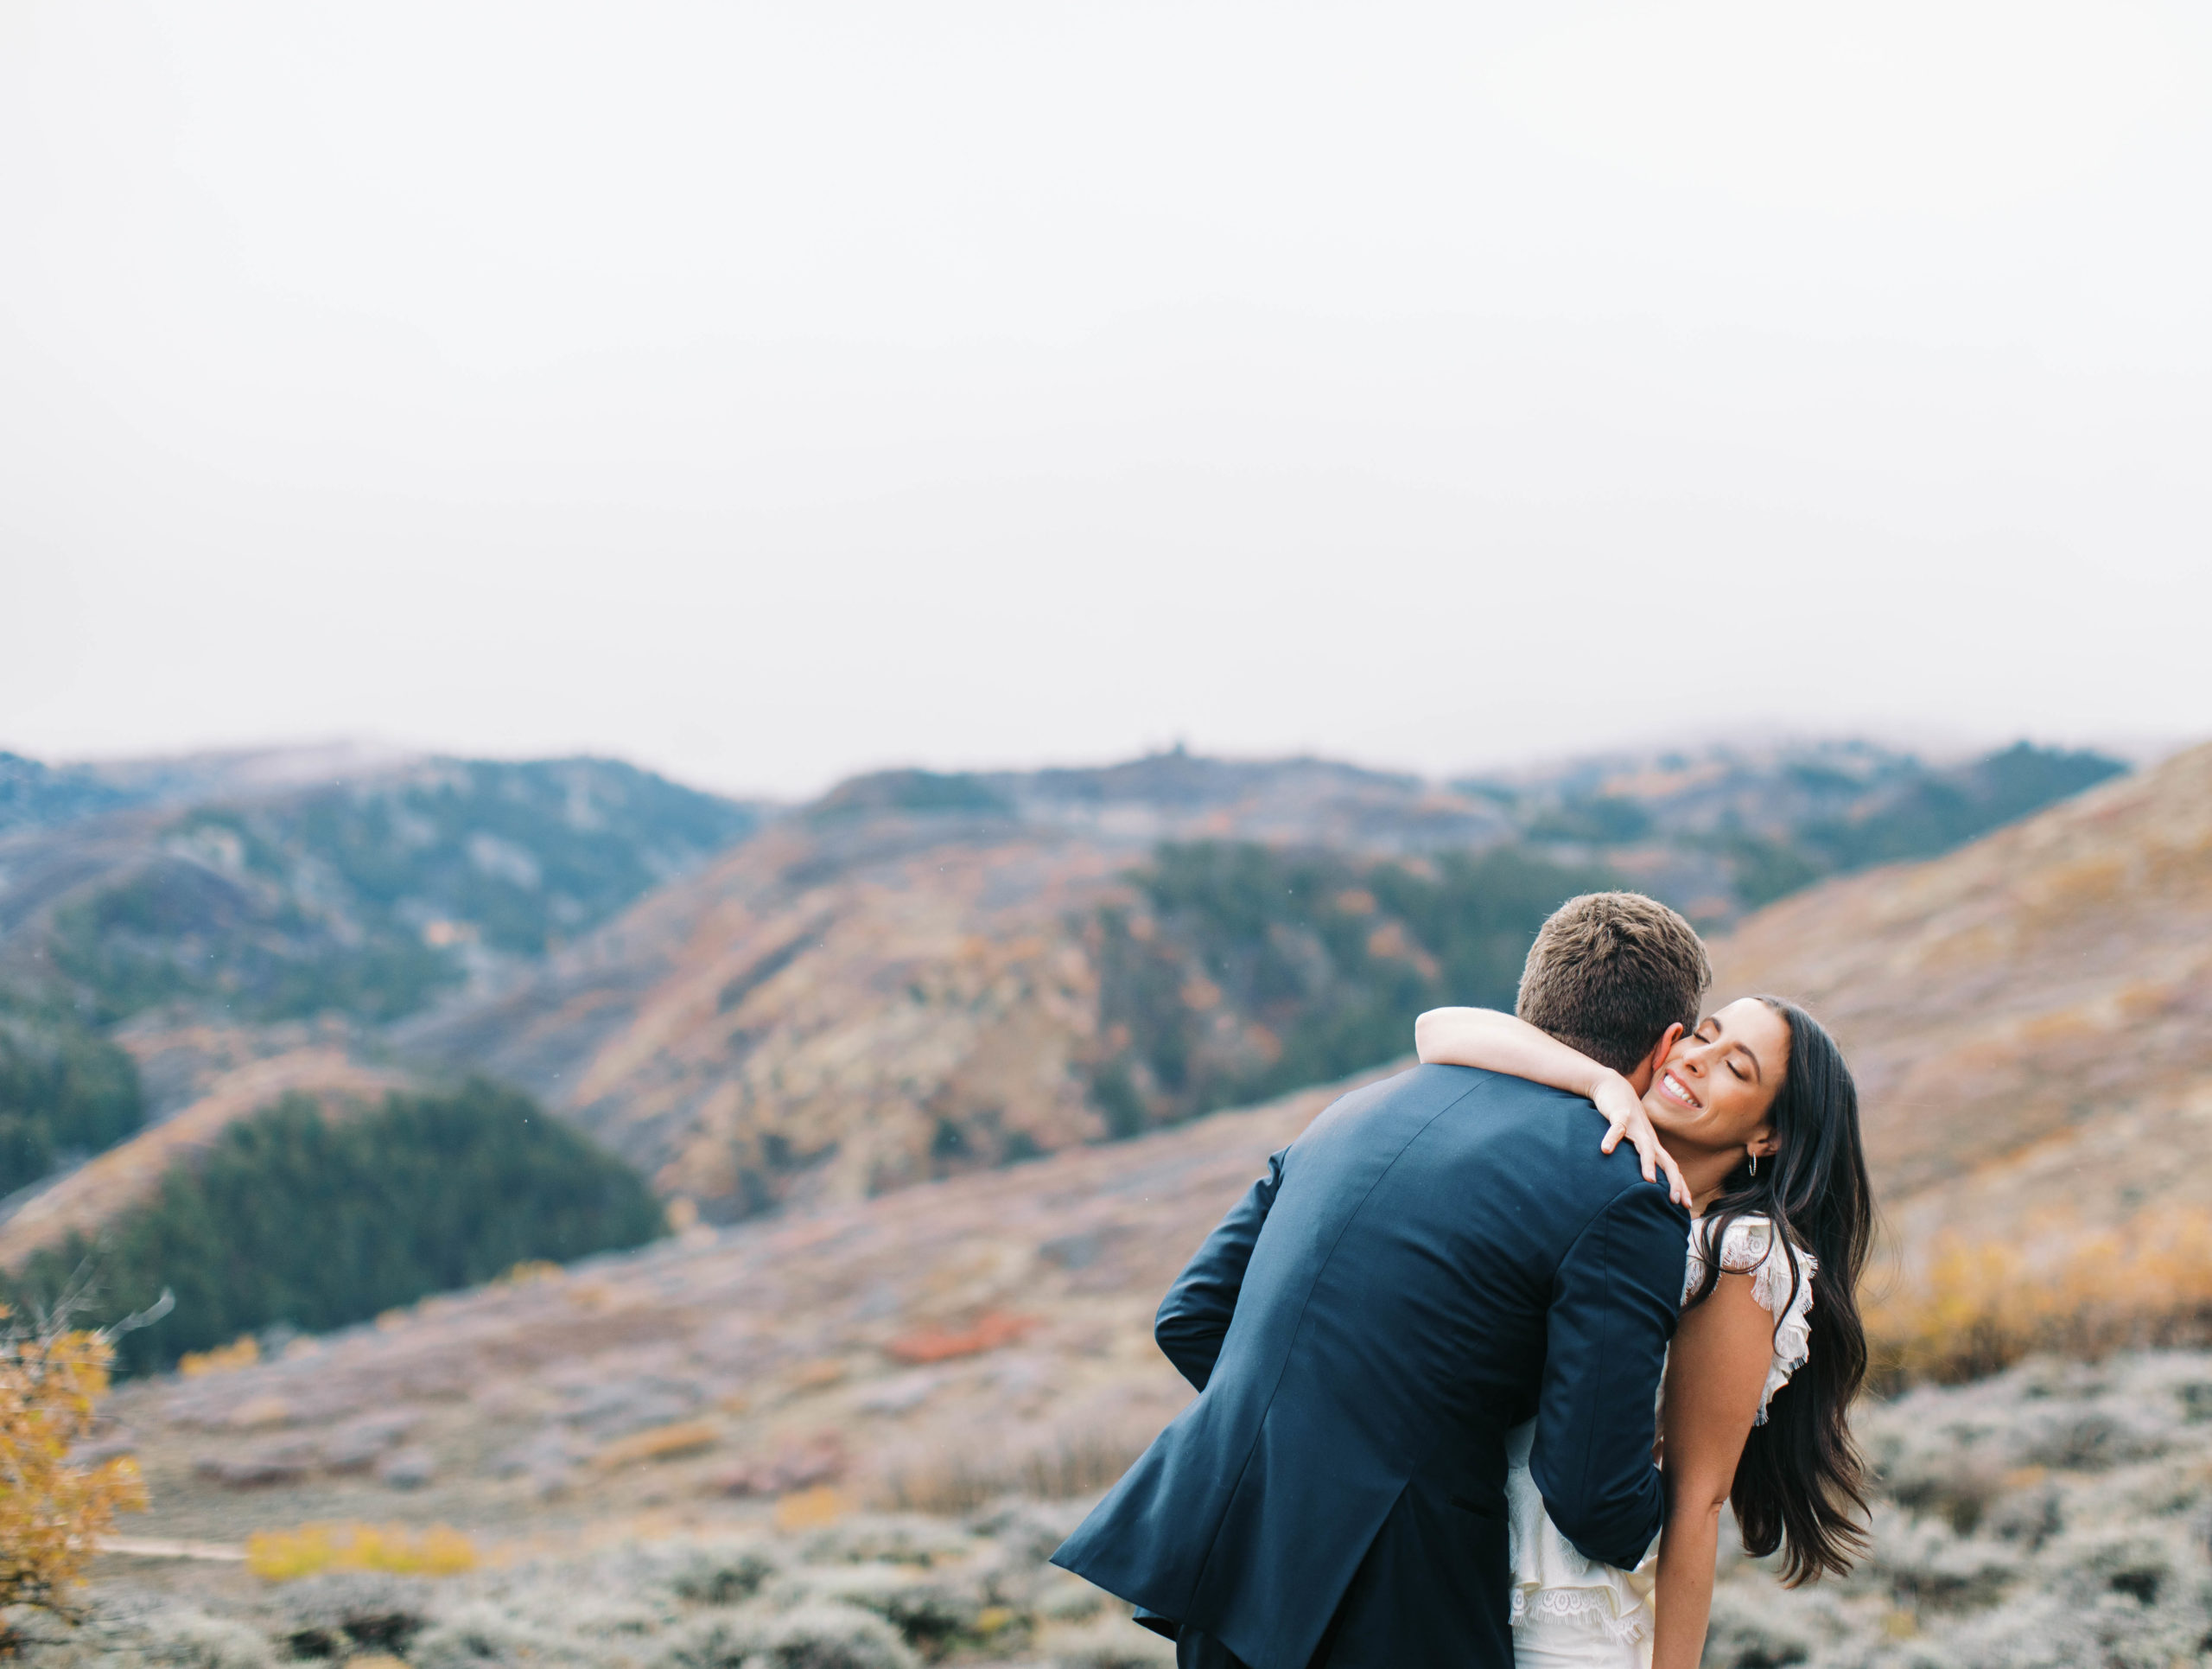 a bride and groom hug during their wedding day first look at blue sky ranch in utah. photo taken by megan robinson photography